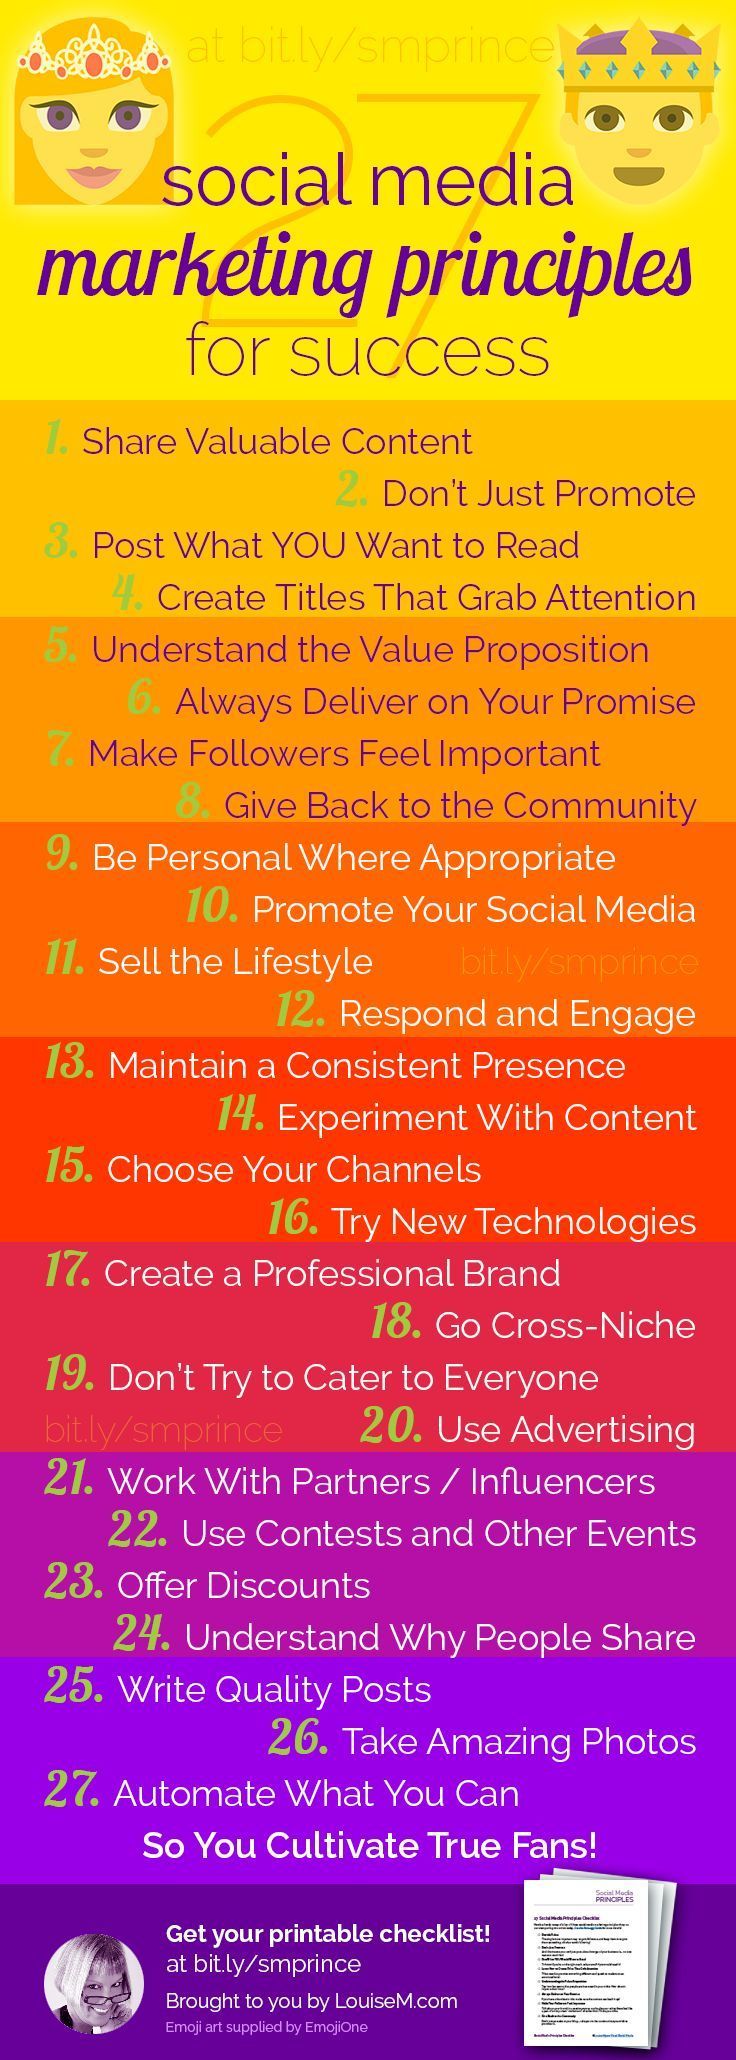 1529945751_893_Marketing-Infographic-Social-media-for-small-business-the-best-marketing-principles-for-success-on-Pi Marketing Infographic : Social media for small business: the best marketing principles for success on Pi...